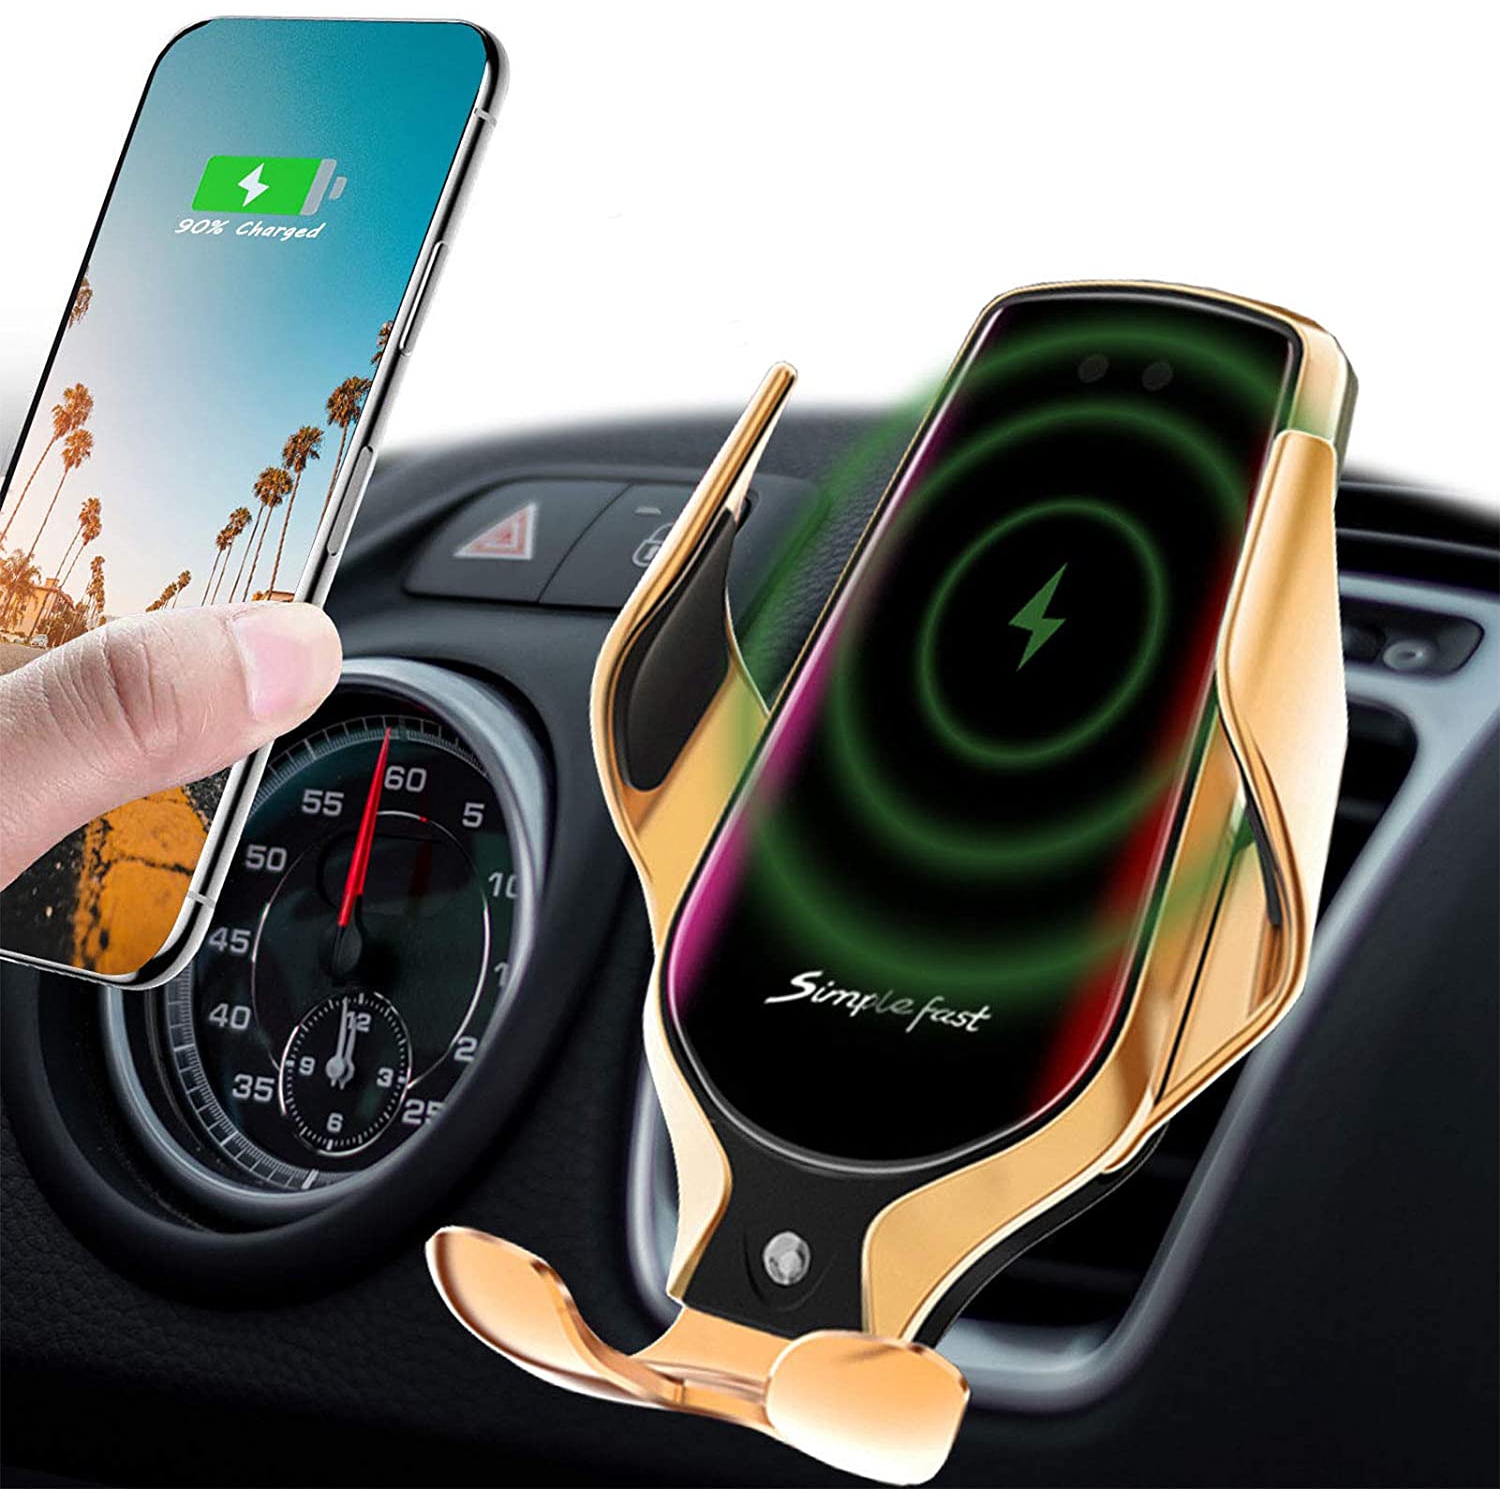 Wingomart R1 Wireless Car Charger Mount, Auto-Clamping Air Vent Phone Holder, 10W Qi Fast Car Charging, Compatible to iPhone 12/12Pro/11/11 Pro/XS Max/X/8/8+, Samsung Note9/Note10/S9+/S10+ [GOLD]